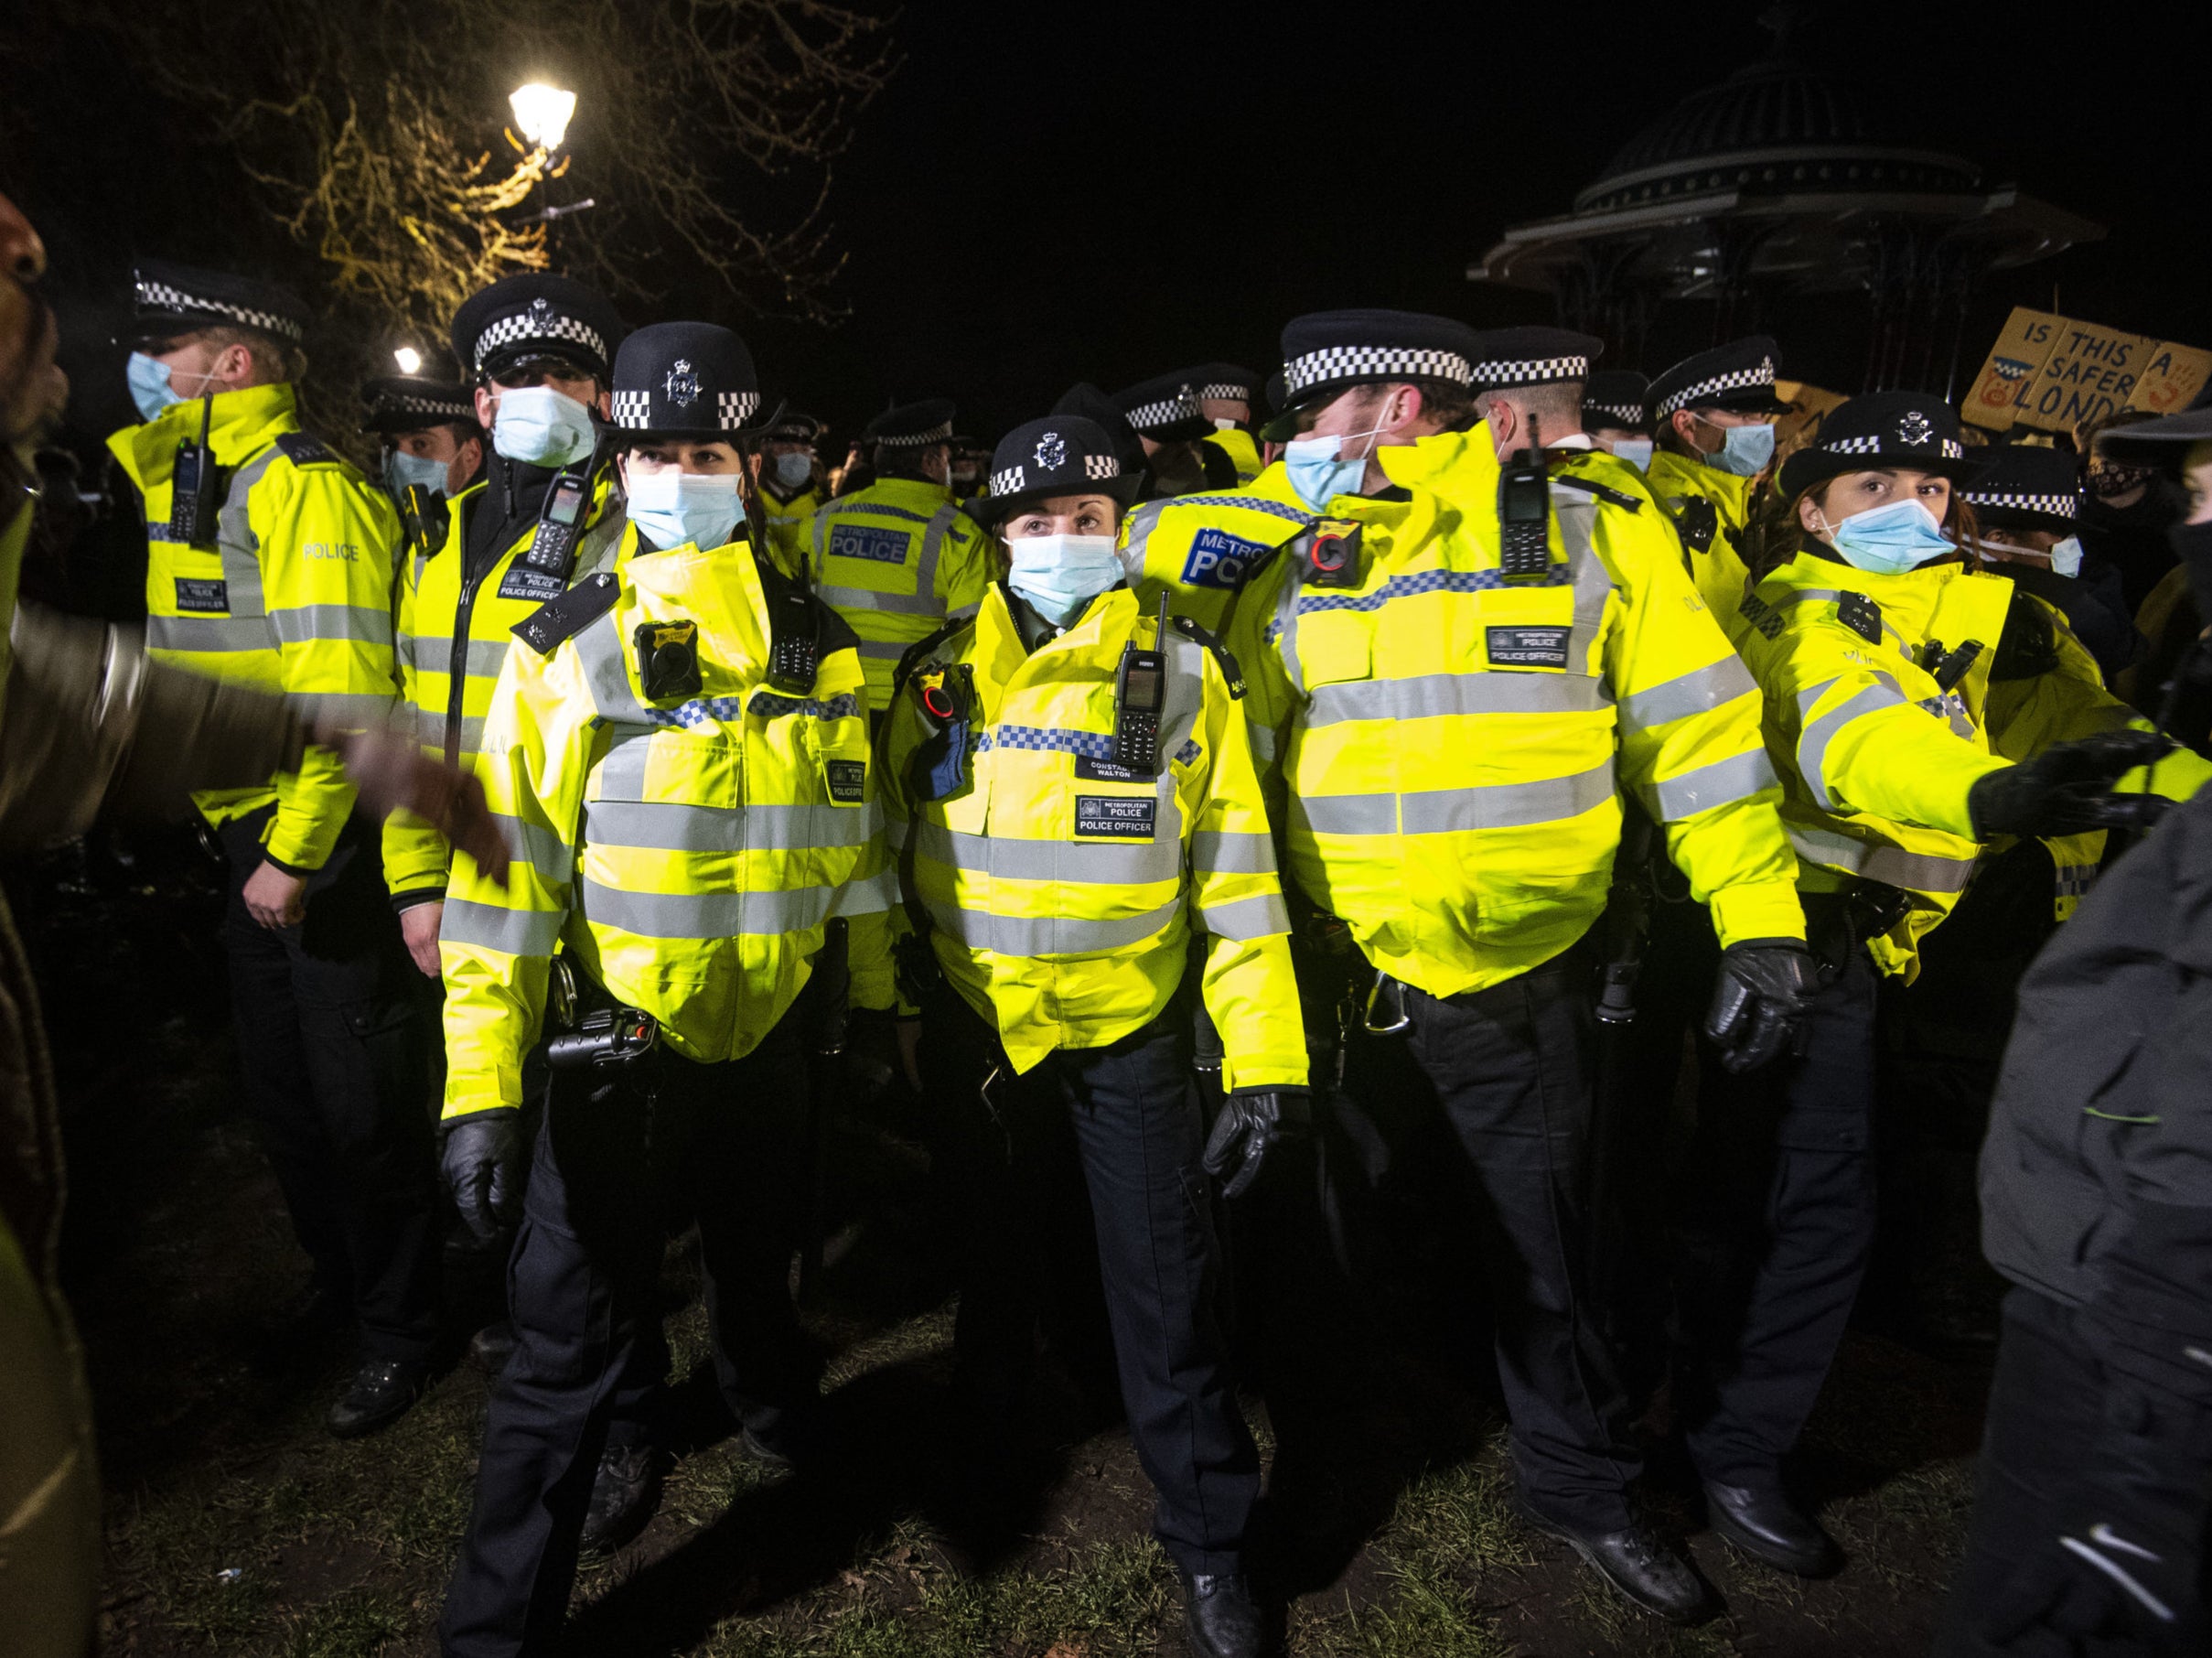 Police clash with people at vigil held to mourn Sarah Everard in Clapham Common in south west London